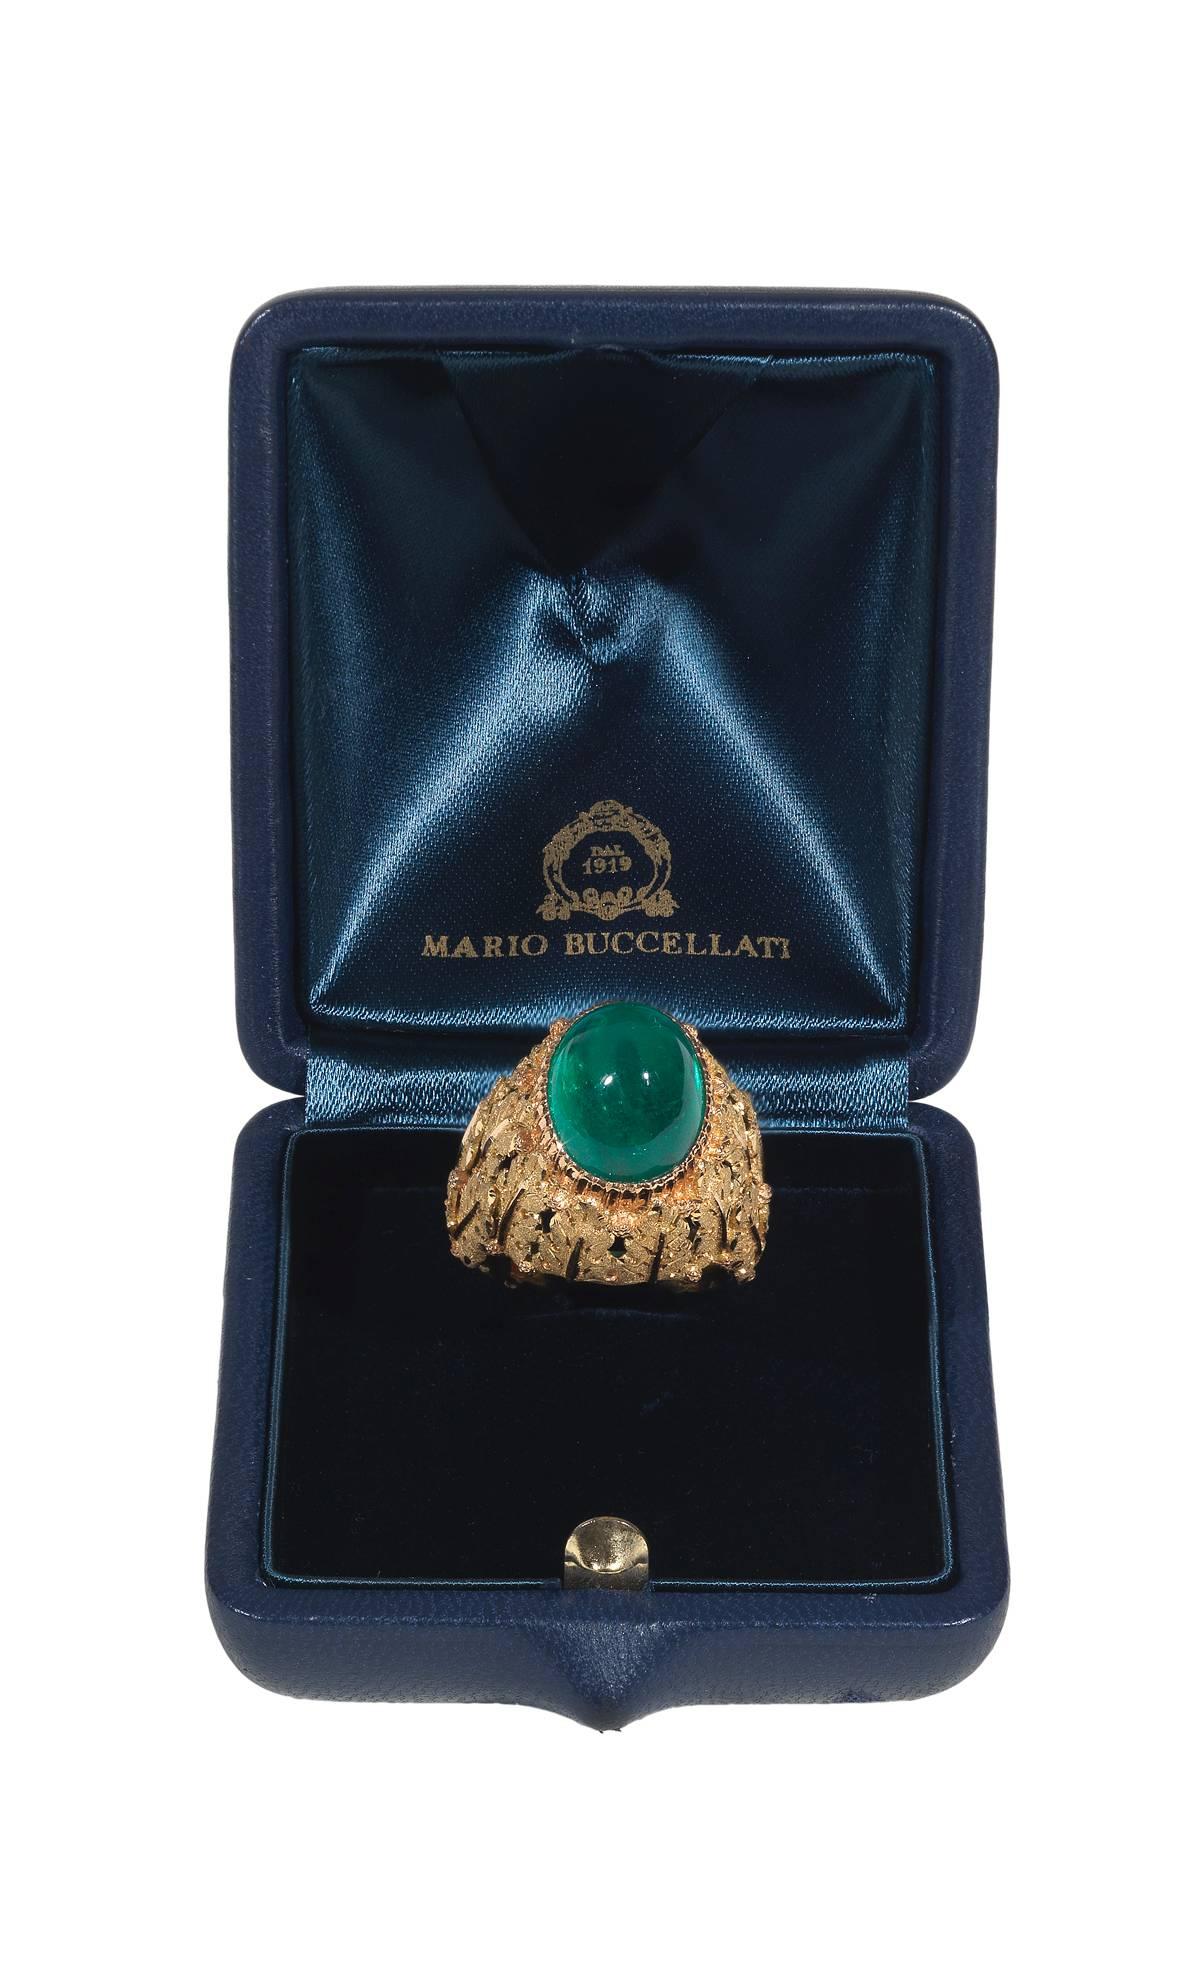 Centered by the collet set oval cabochon emerald weighing approximately 8.90 cts to a textured and engraved 18Kt yellow gold setting

The emerald is approximately 14 x 11 mm

Signed M. Buccellati, in the original maker's case.

Weight: 17.8 gr